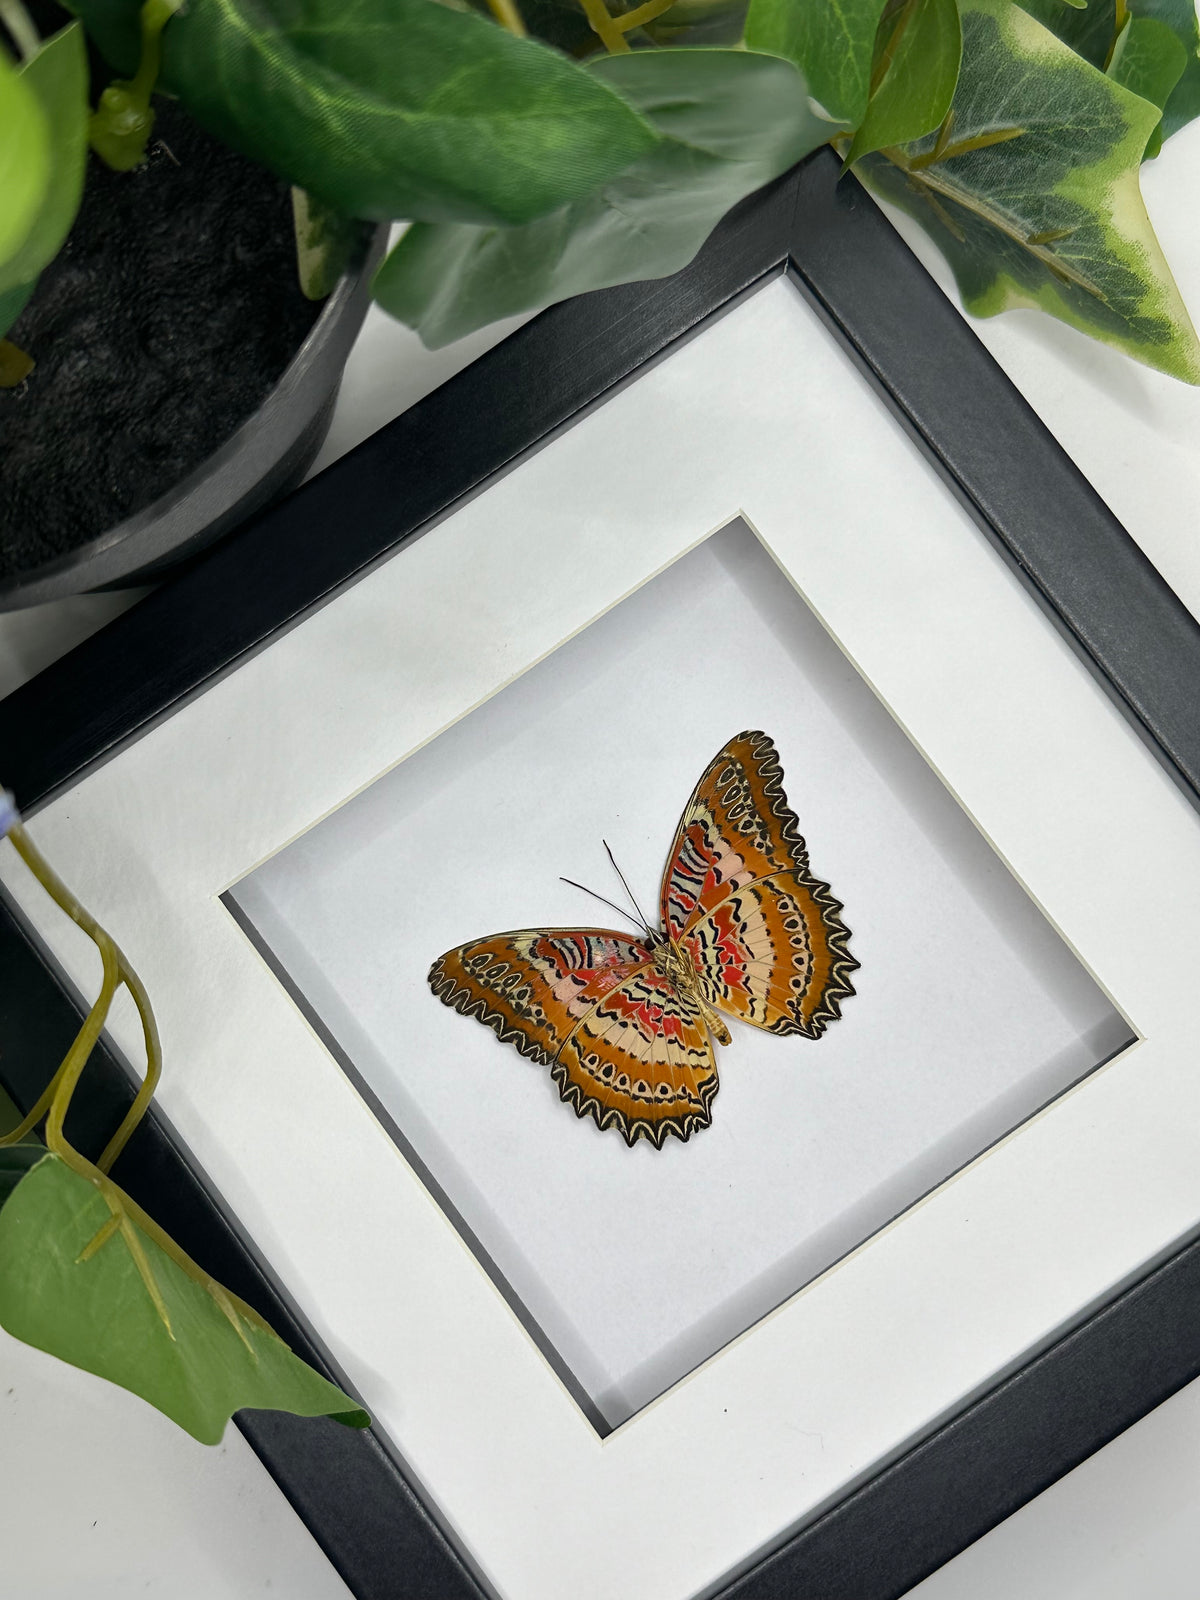 Lacewing Butterfly / Cethosia Cydippe in a frame